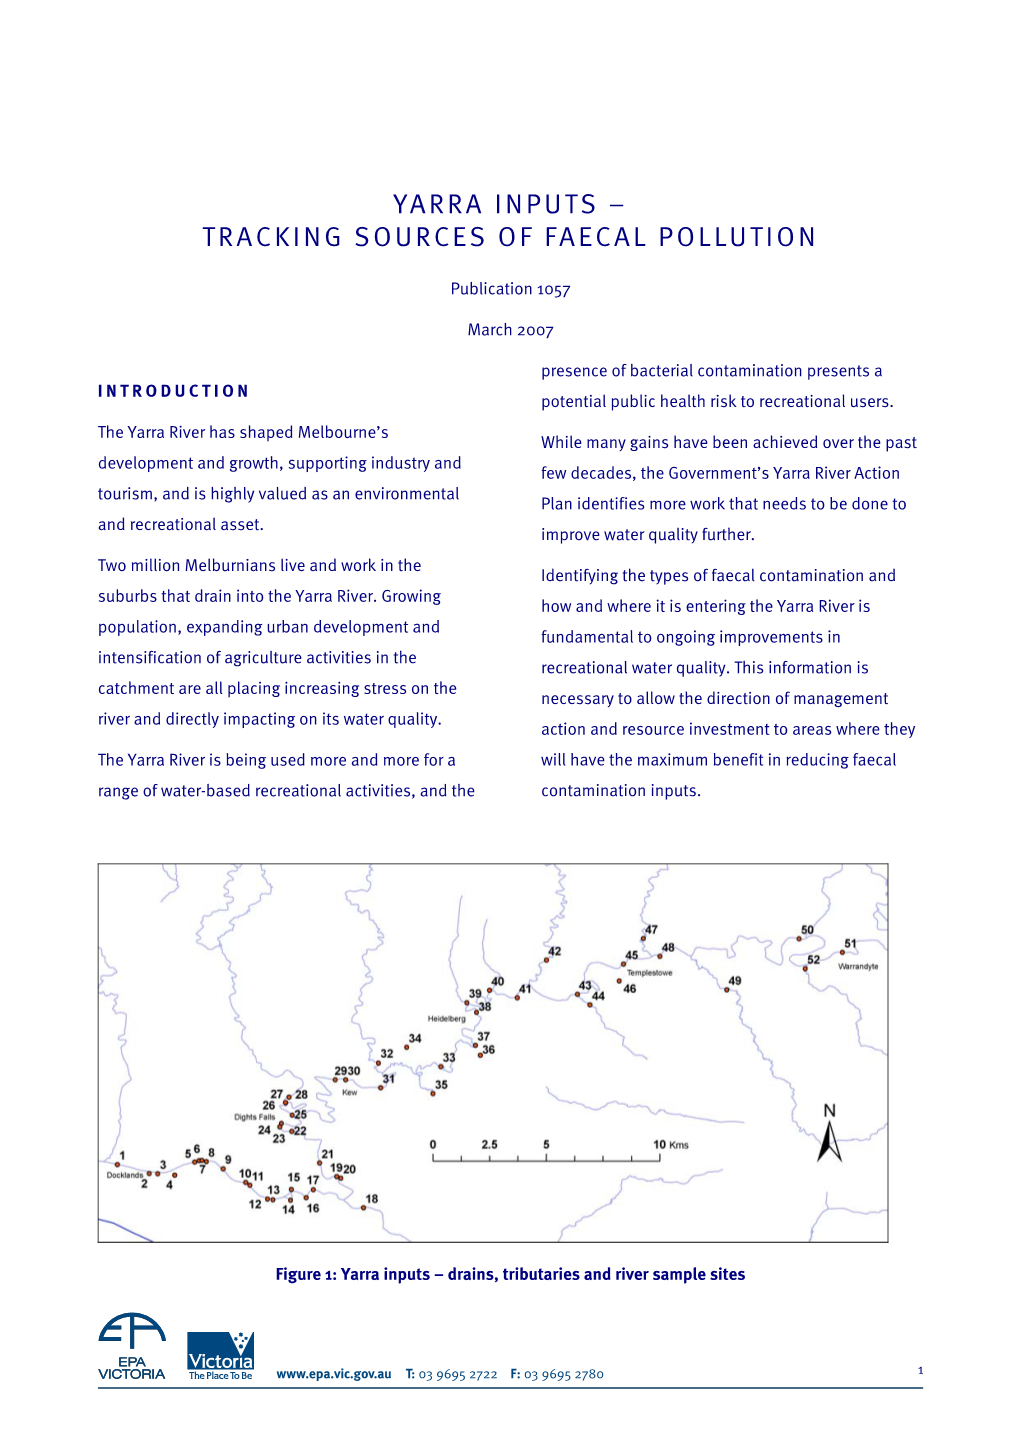 Yarra Inputs – Tracking Sources of Faecal Pollution